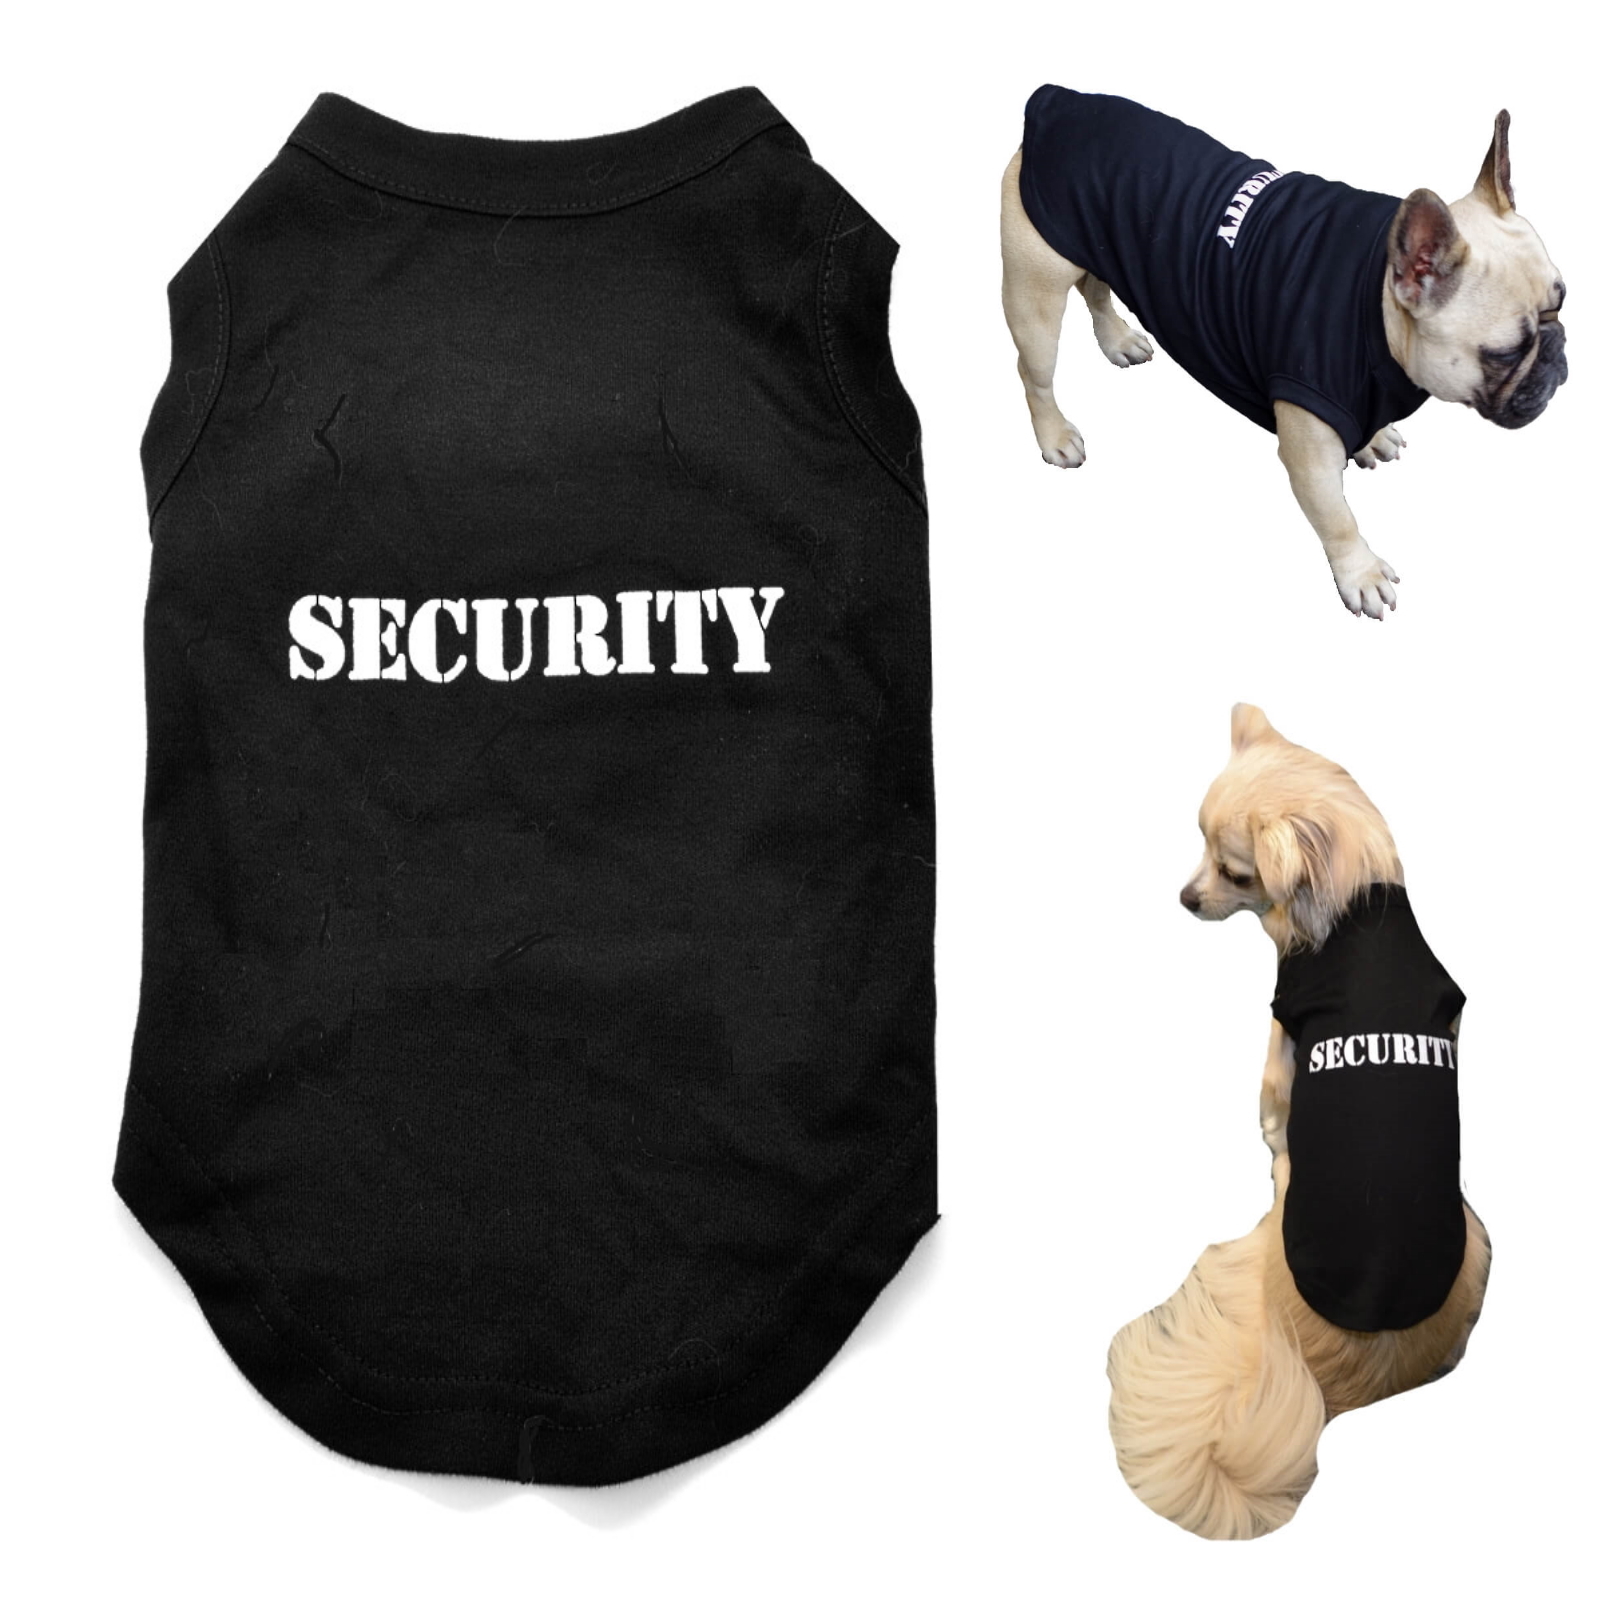 Miniatuur opening Betsy Trotwood Dog T Shirt Security Black XXS XS S M L XL - Puppy Chihuahua Pug Poodle |  eBay